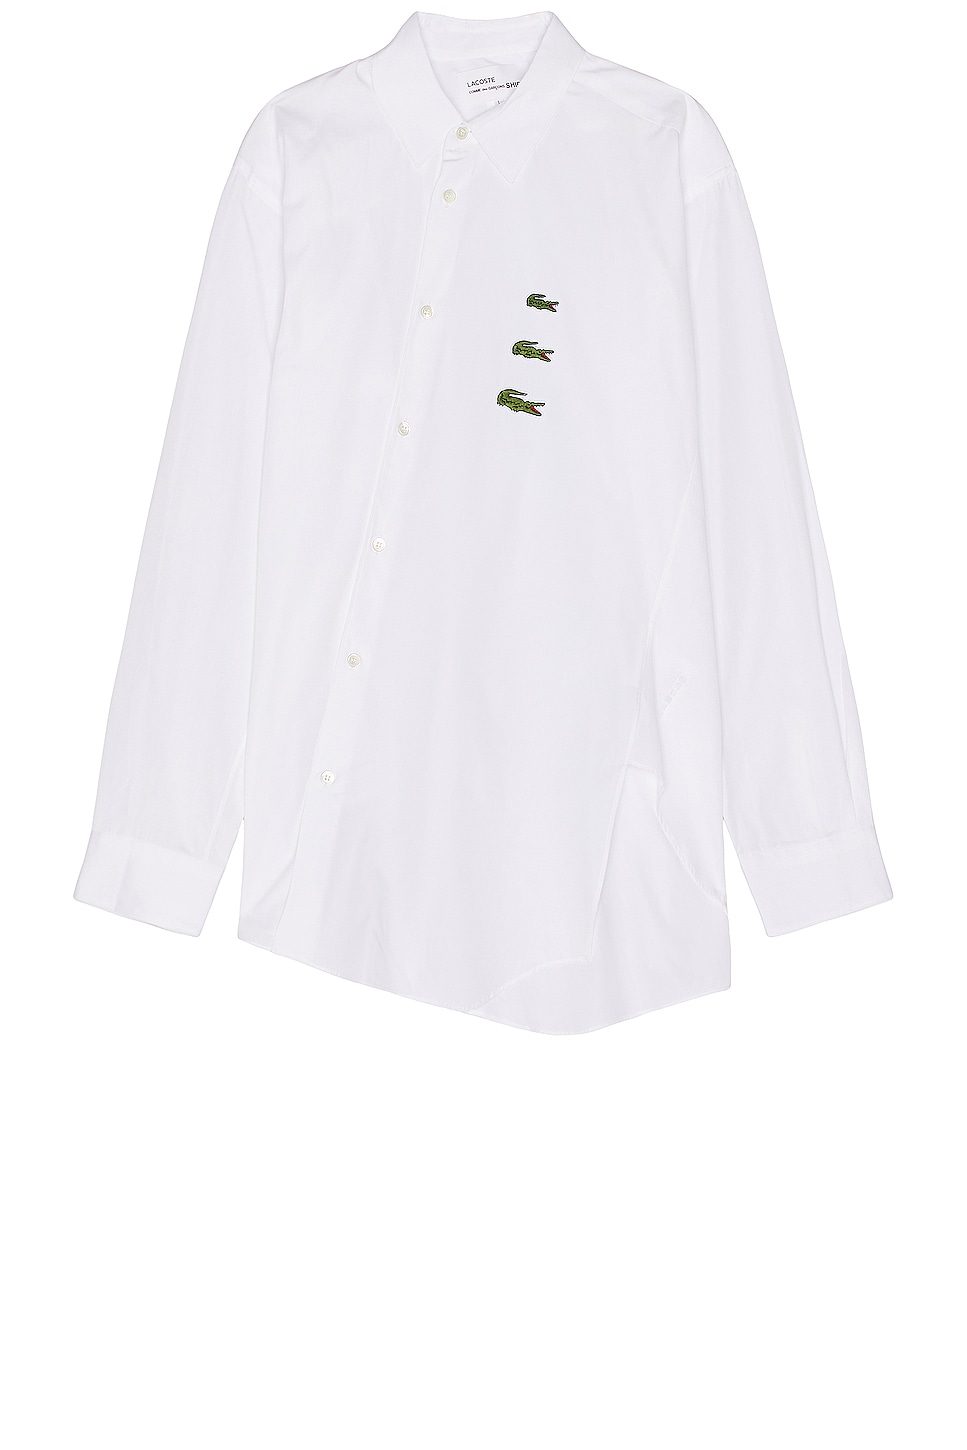 Image 1 of COMME des GARCONS SHIRT X Lacoste Shirt in White